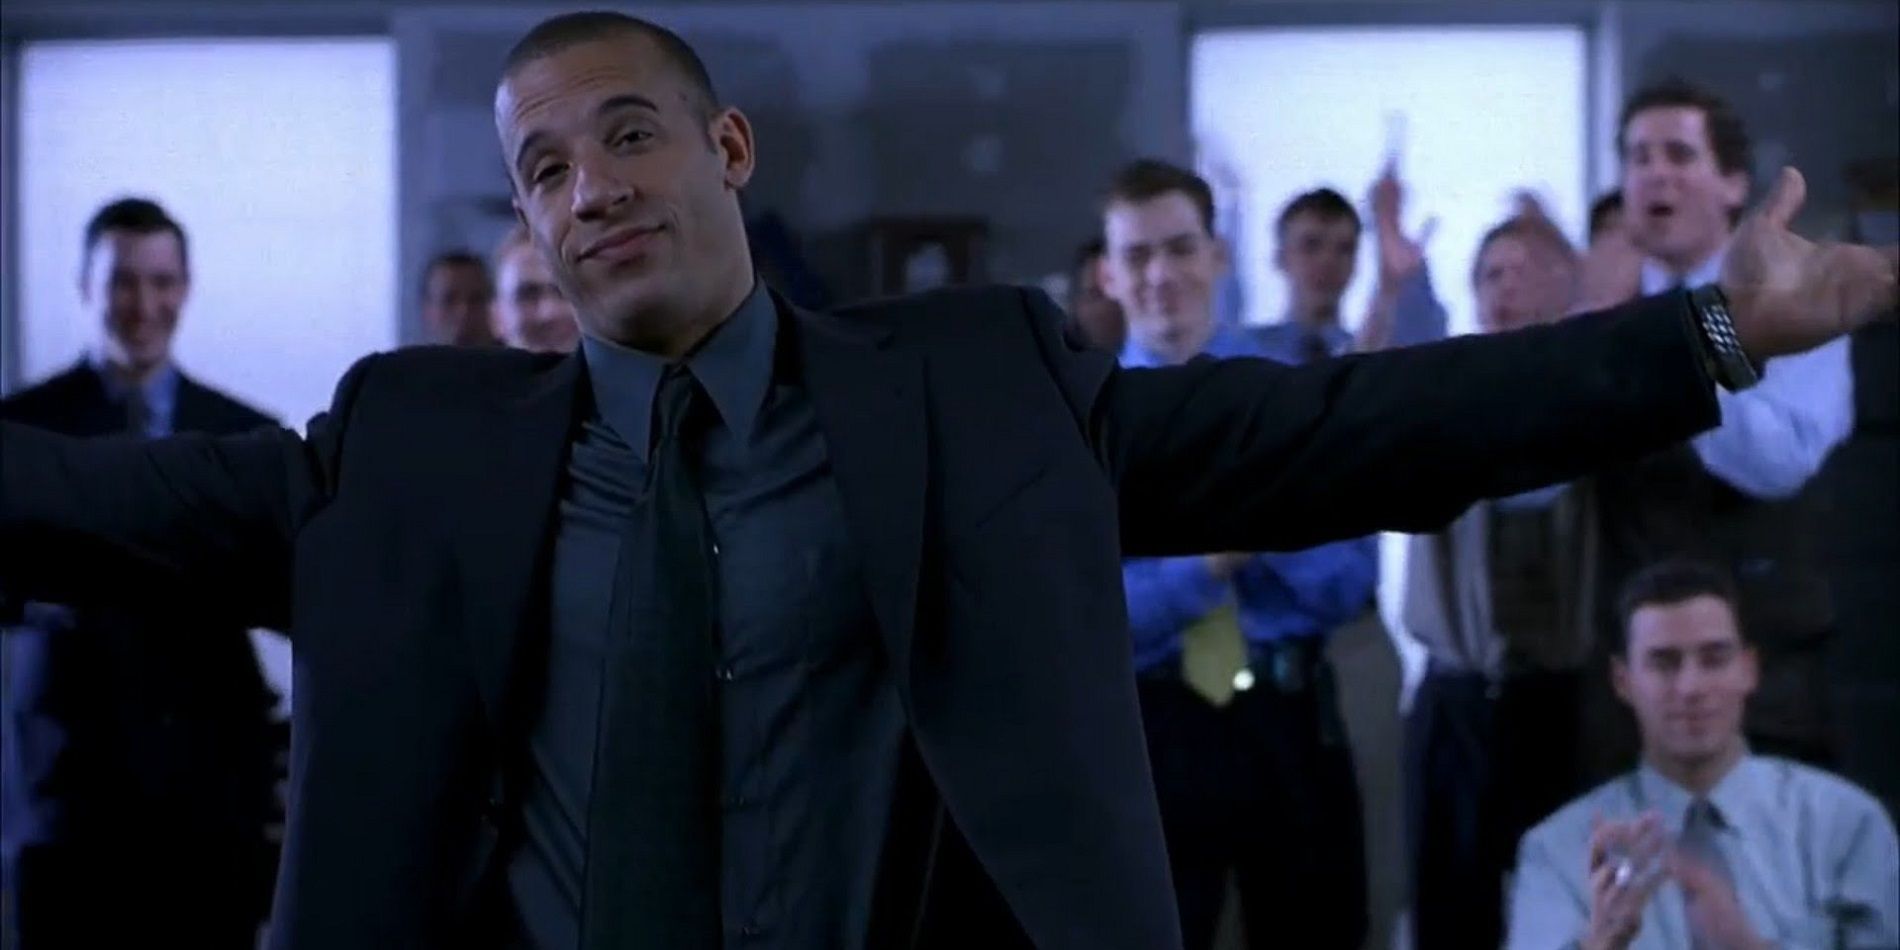 Vin Diesel with his arms stretched out in Boiler Room